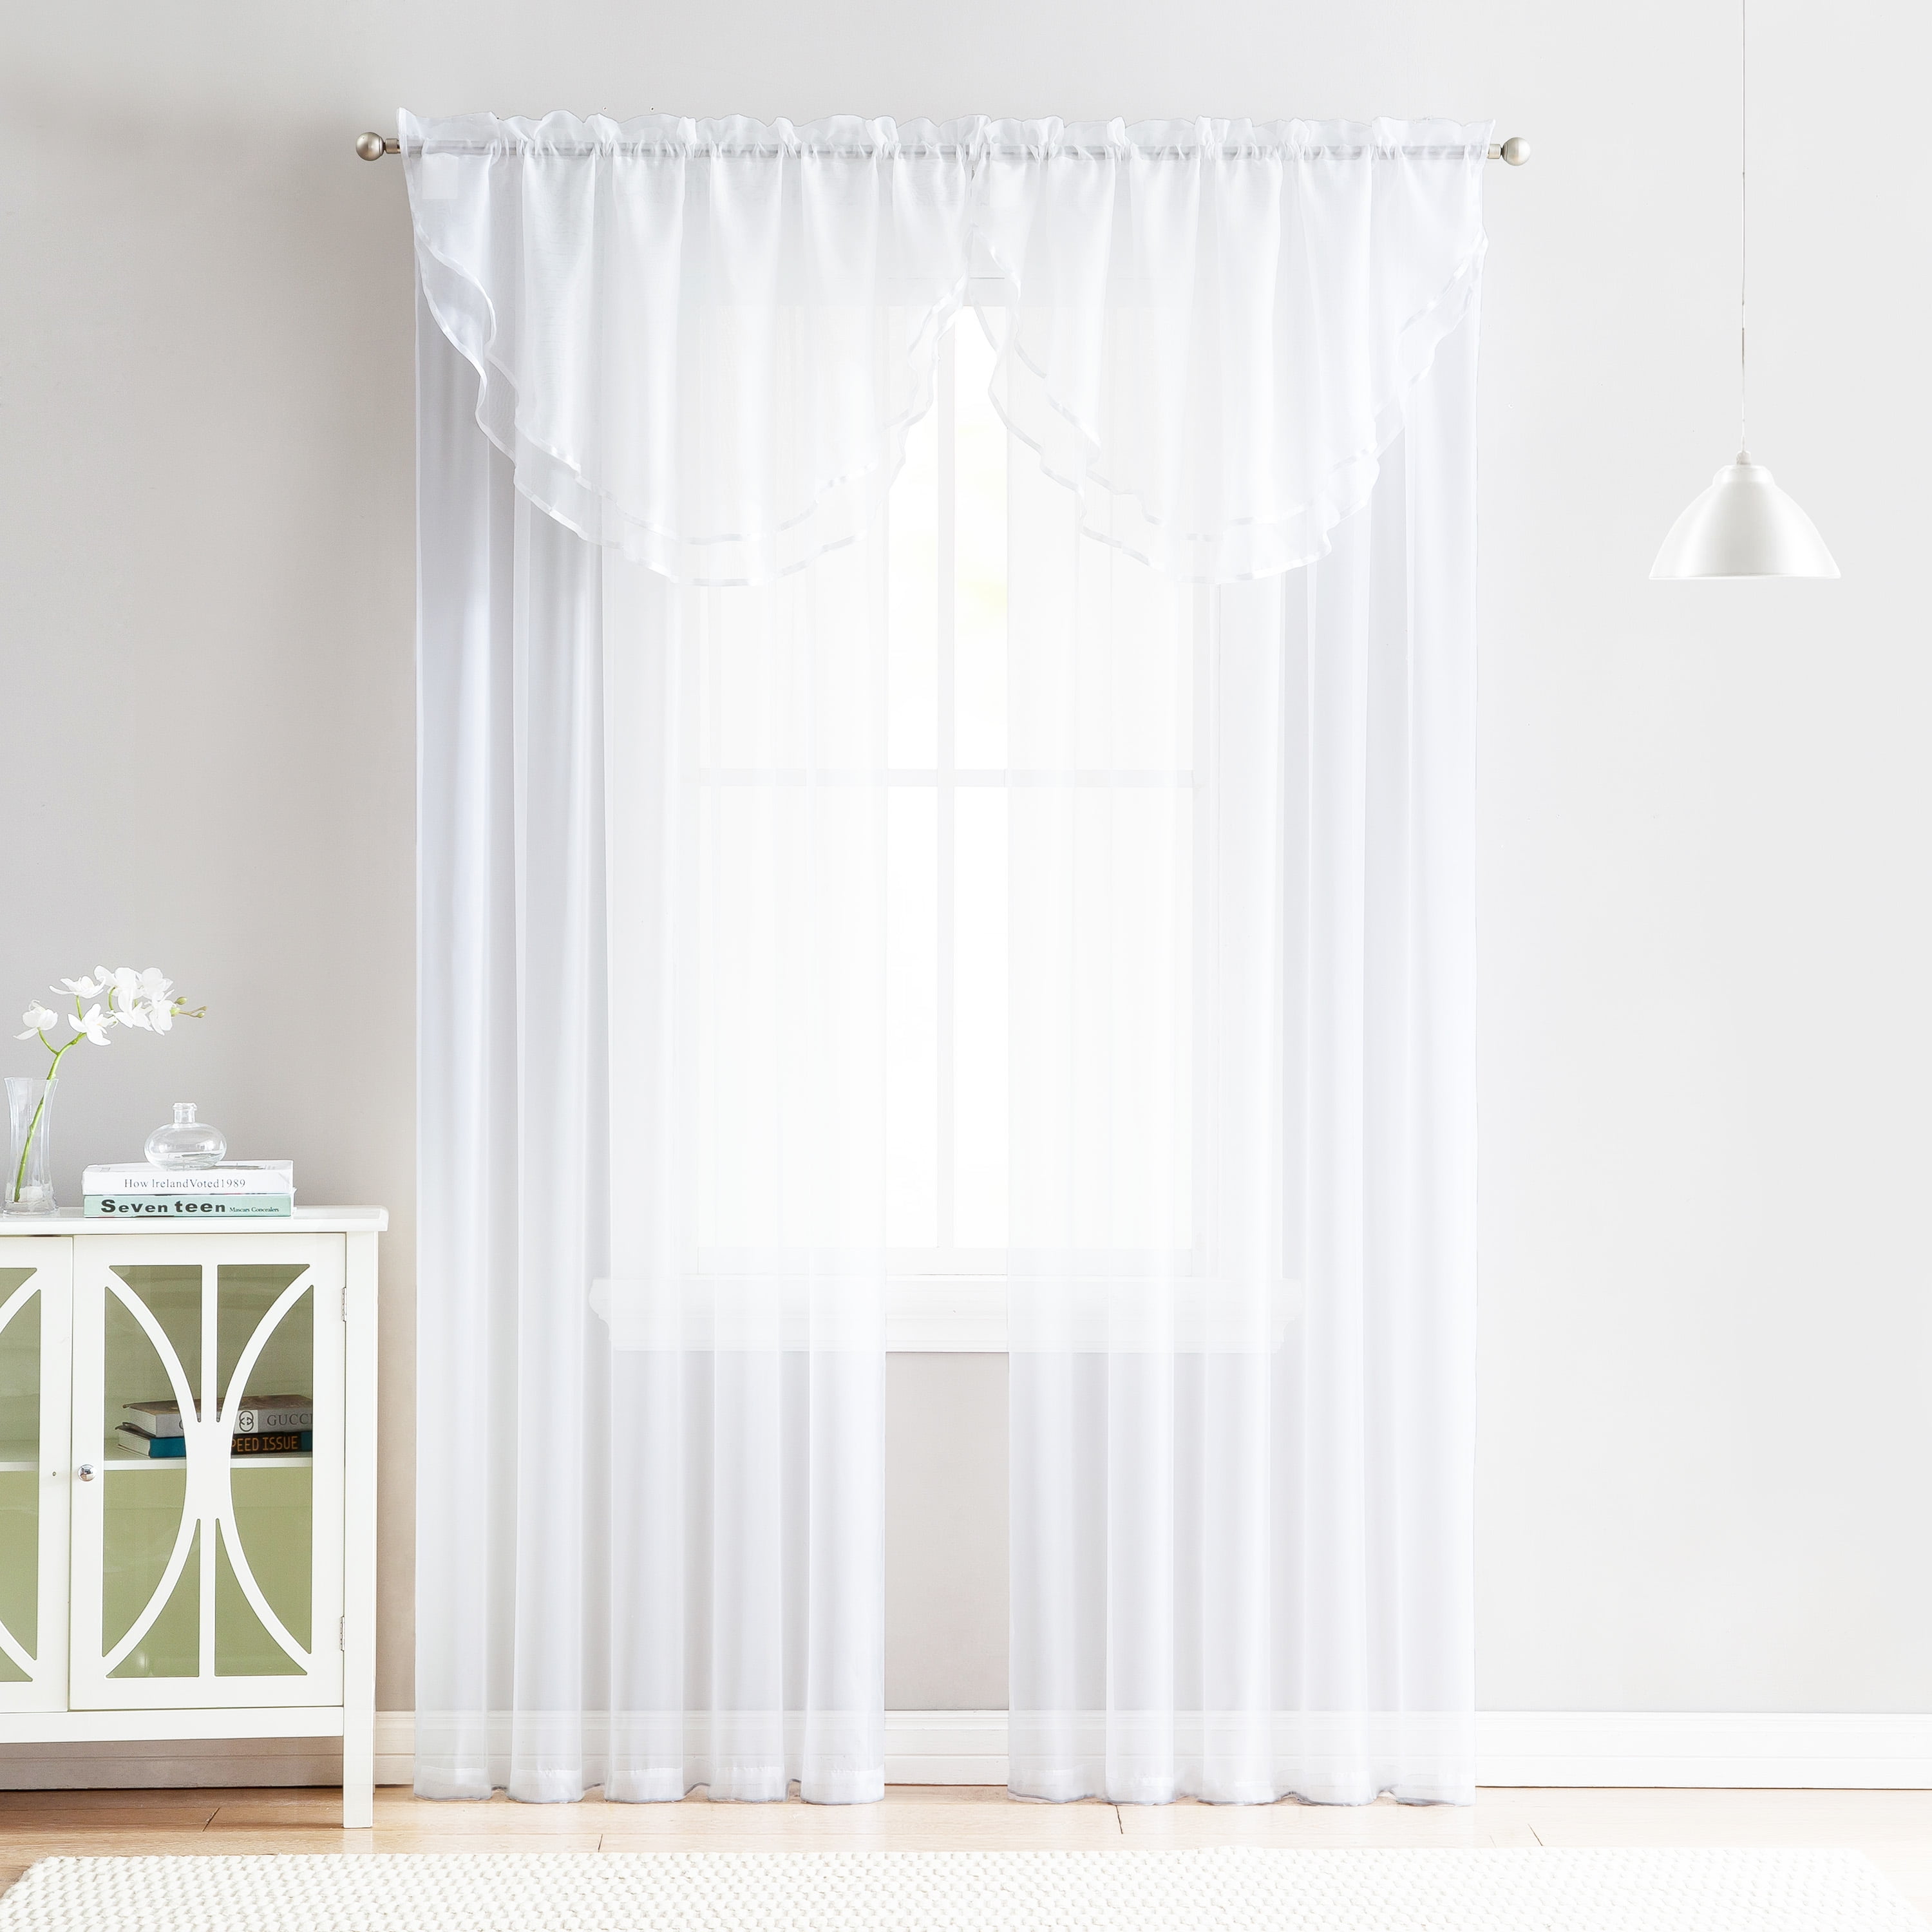 4 Piece Sheer Window Curtain Set for Living Room, Dining Room, Bay ...